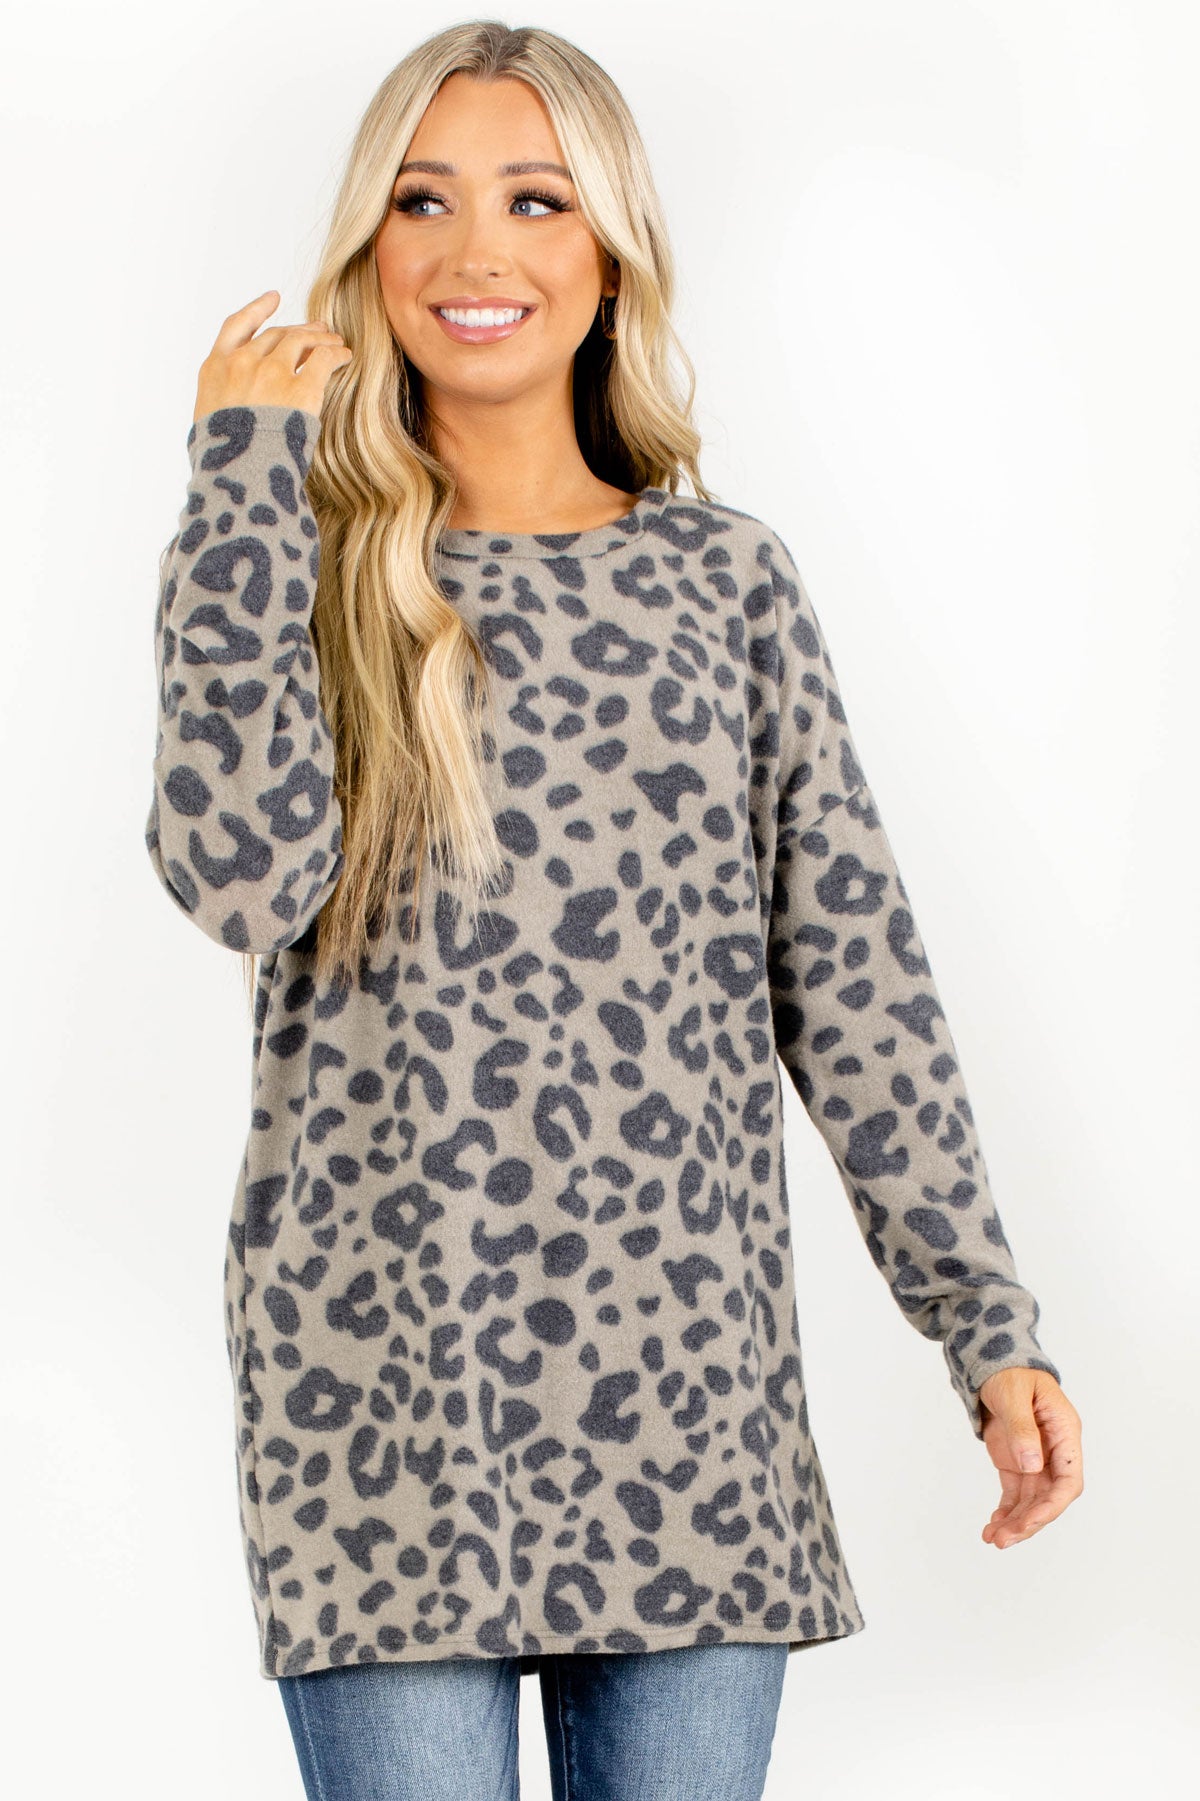 Olive Long Sleeve Top with Leopard Print for Women